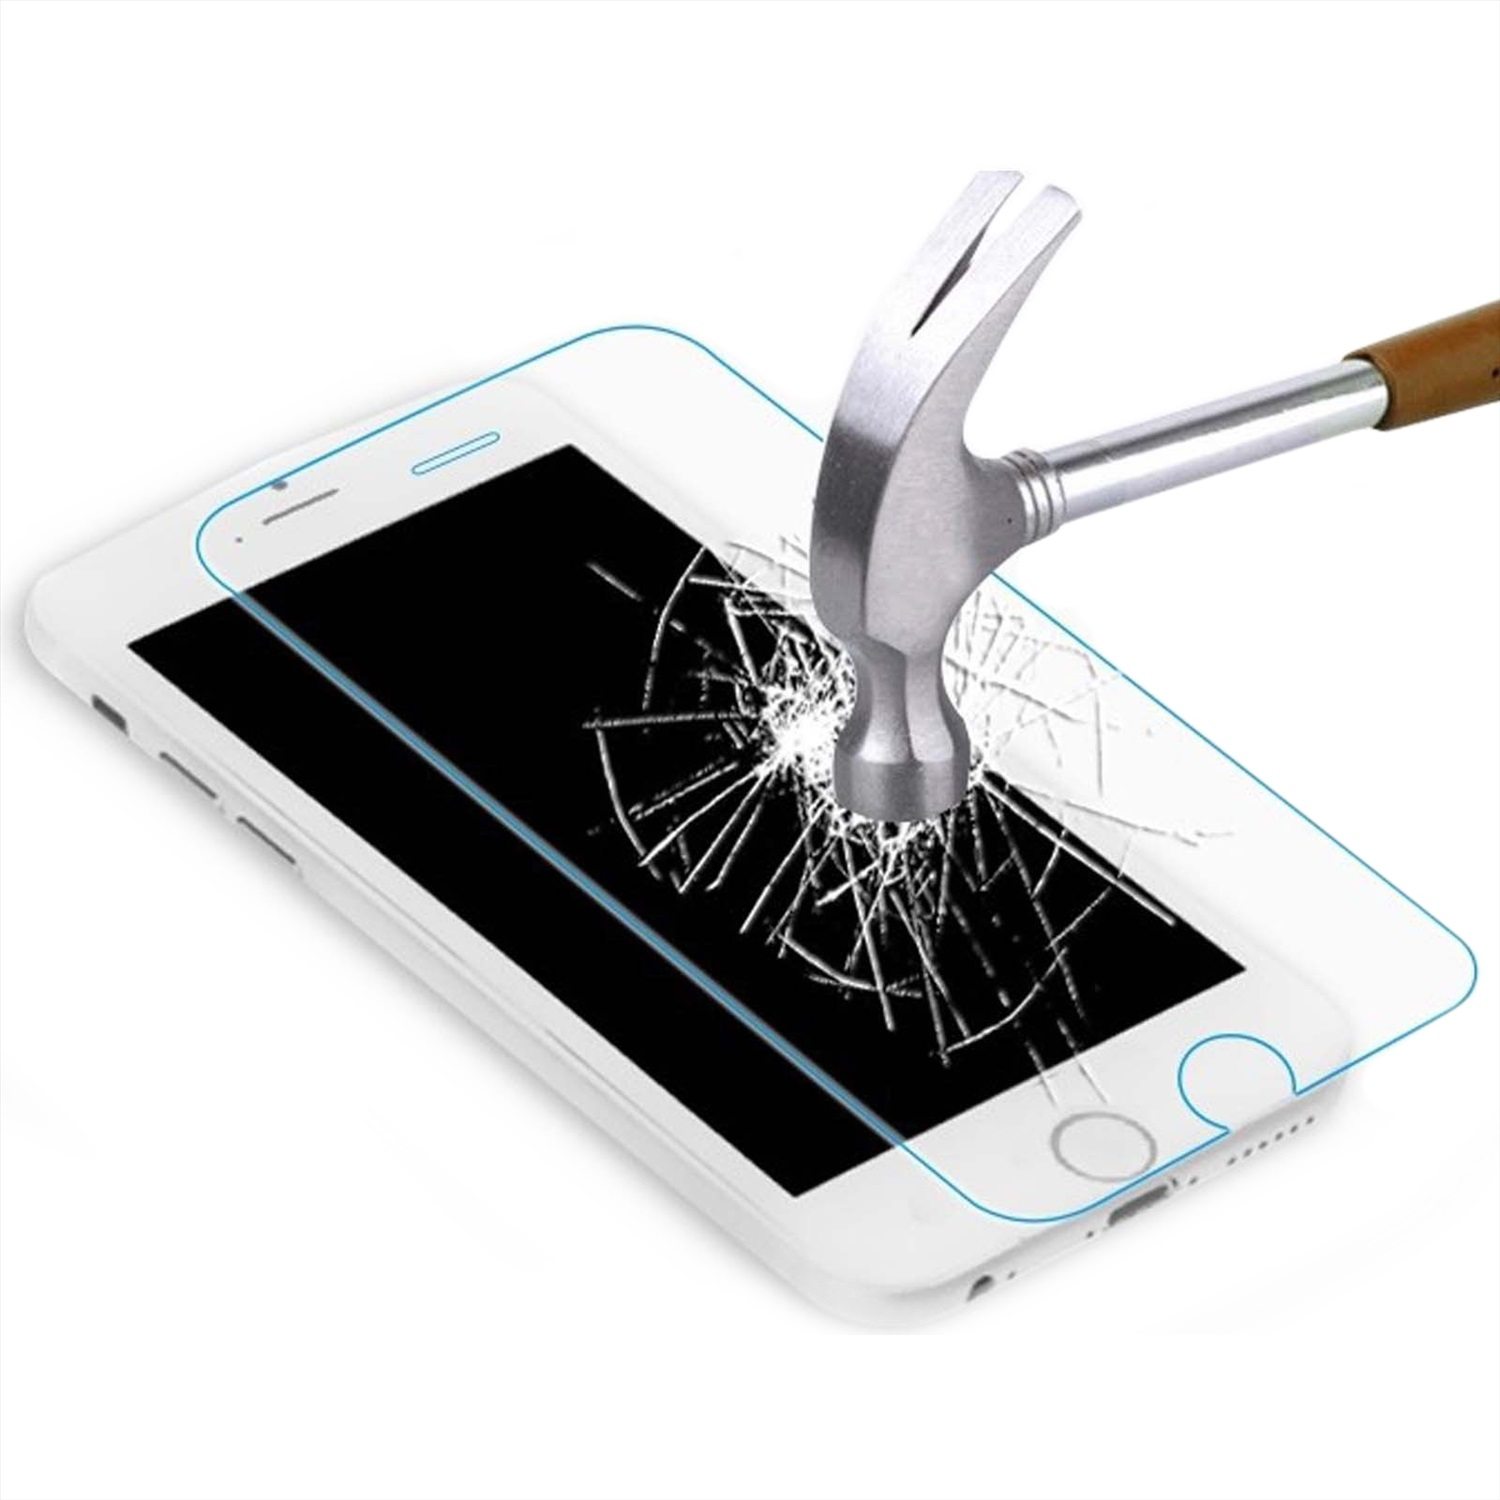 Safety glass on the phone - it is worth buying?